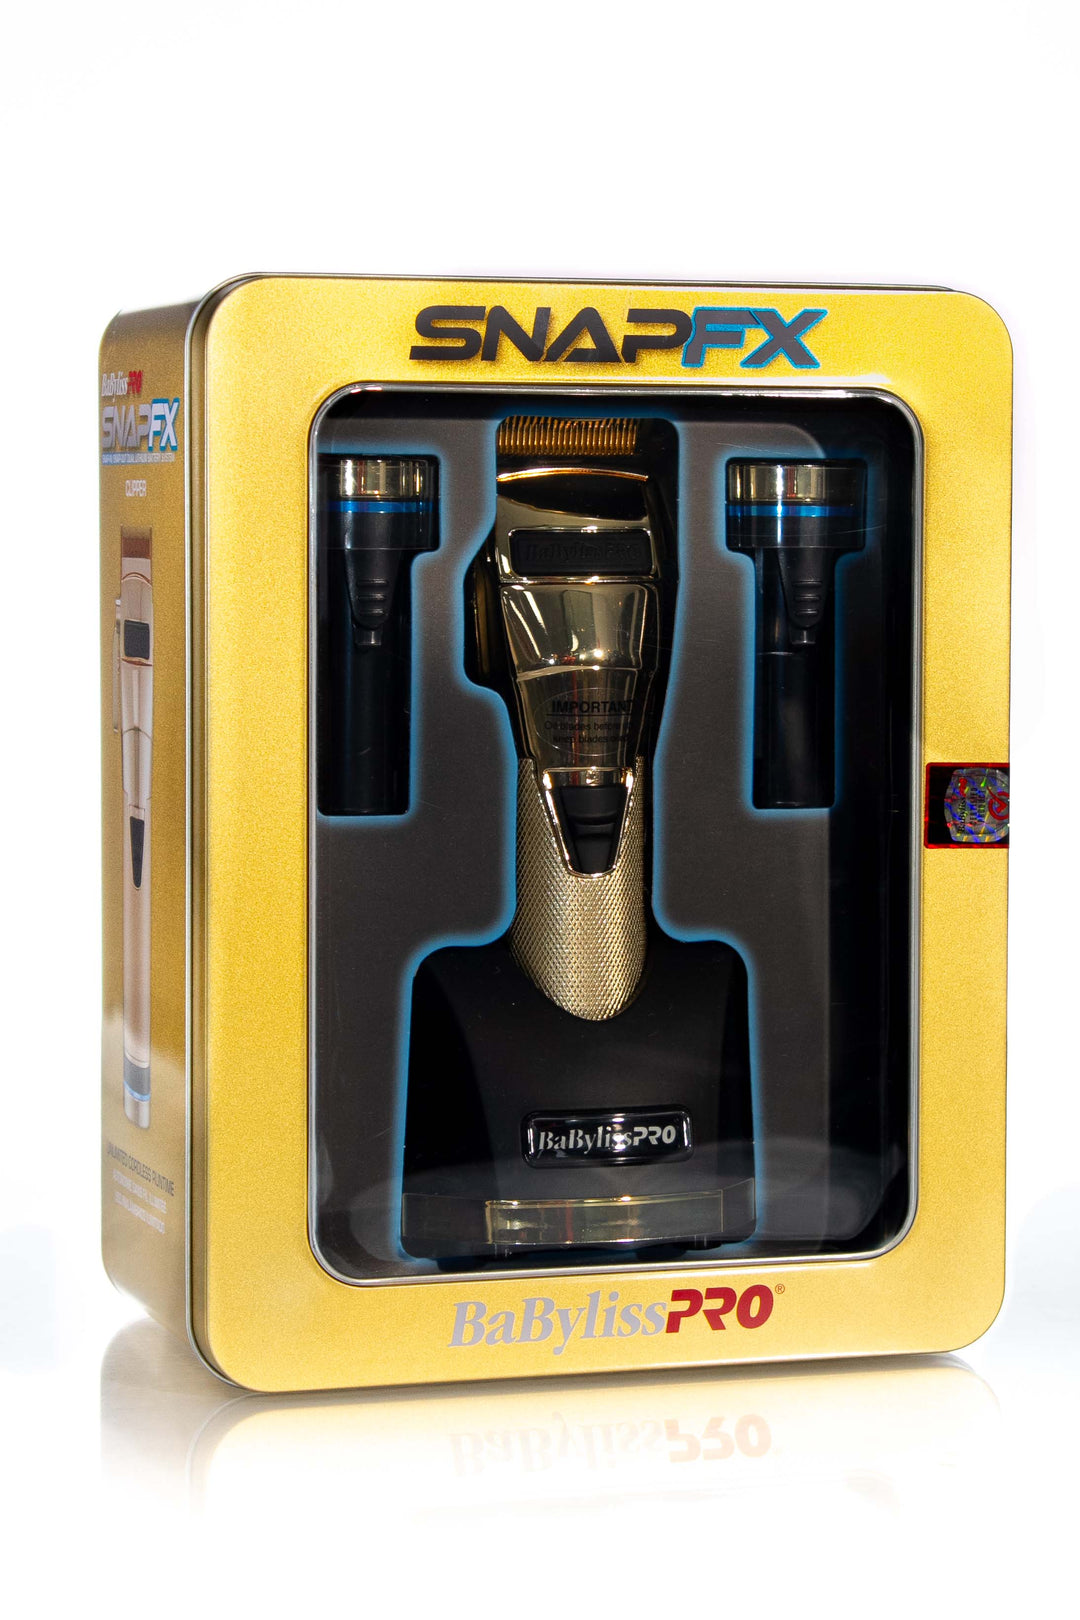 BABYLISS PRO SNAPFX CLIPPER GOLD